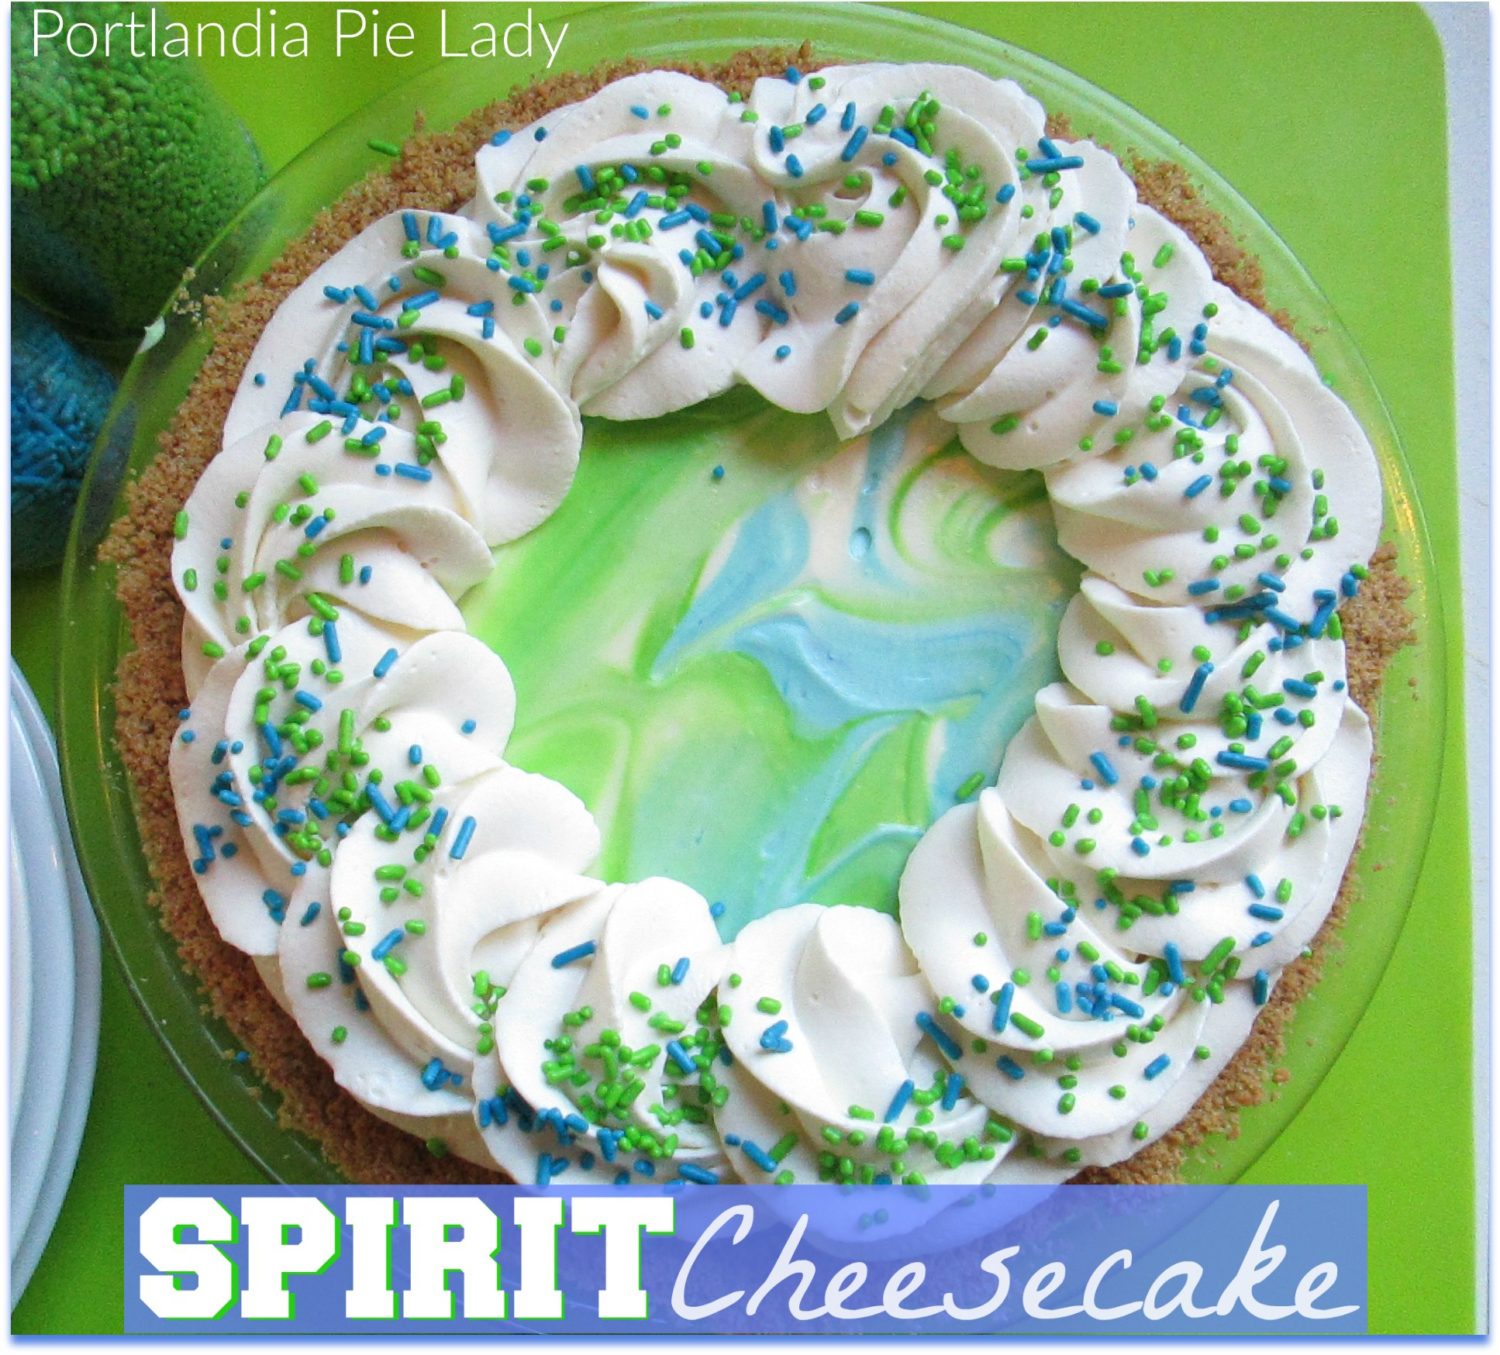 Cheer on your favorite team with this super creamy cheesecake icebox pie with a light lemony taste and a lot of team spirit!